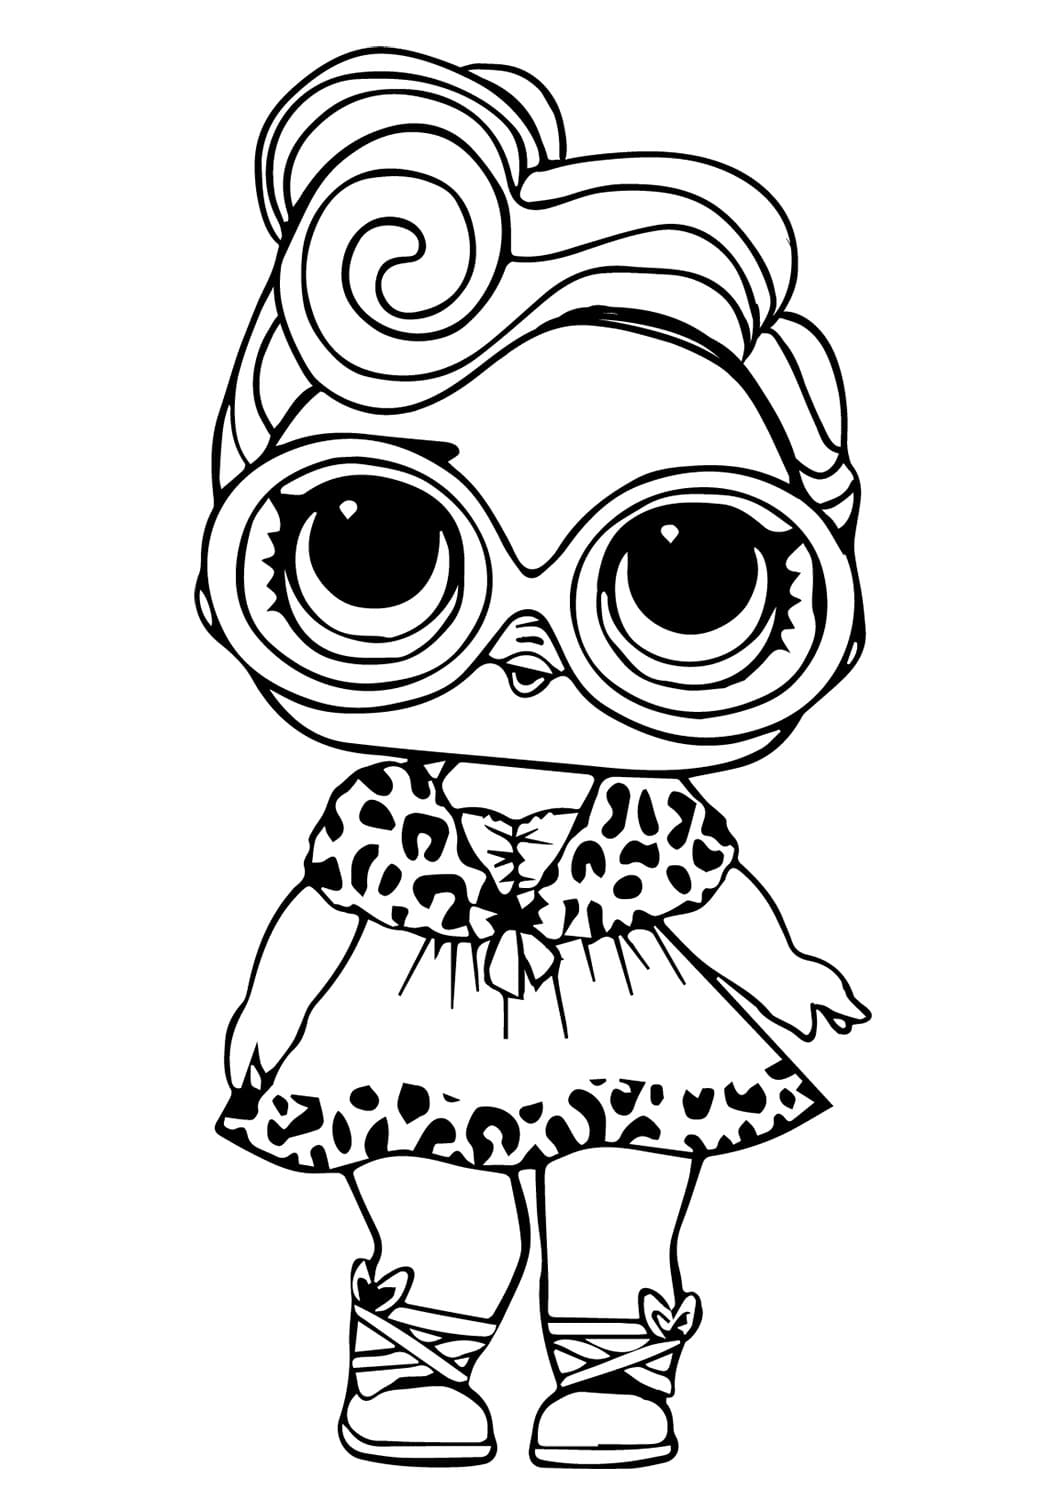 Dollface LOL coloring page